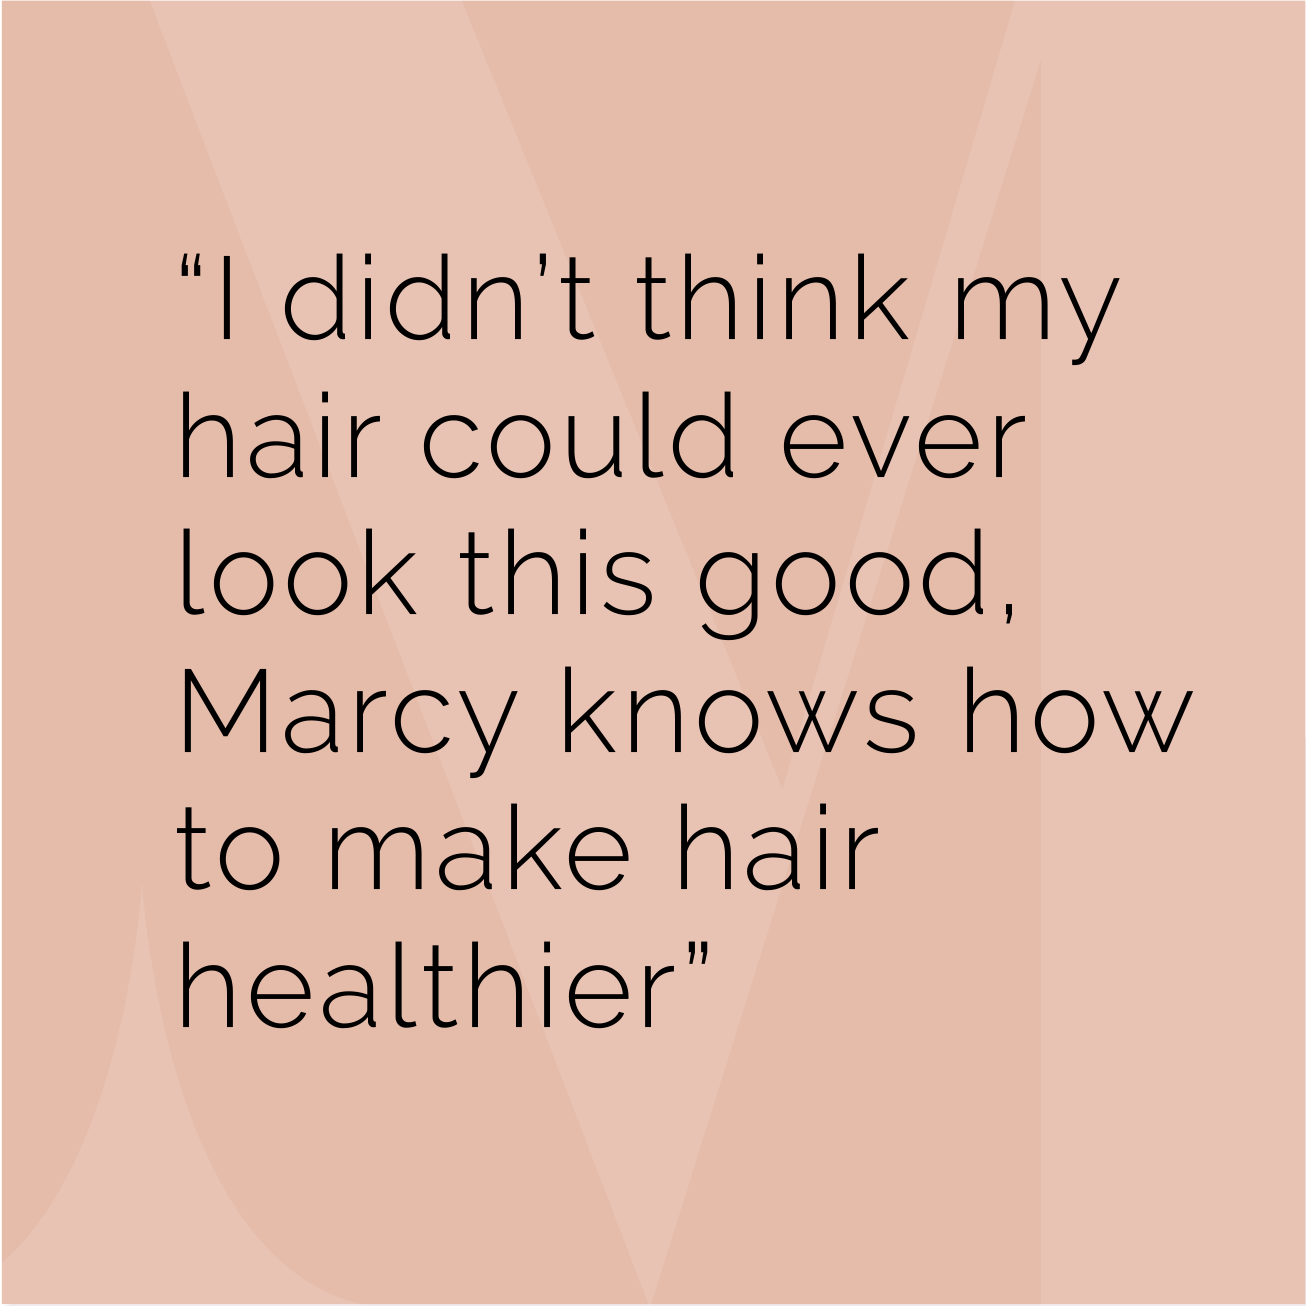 "I didn't think my hair could ever look this good, Marcy knows how to make hair healthier"